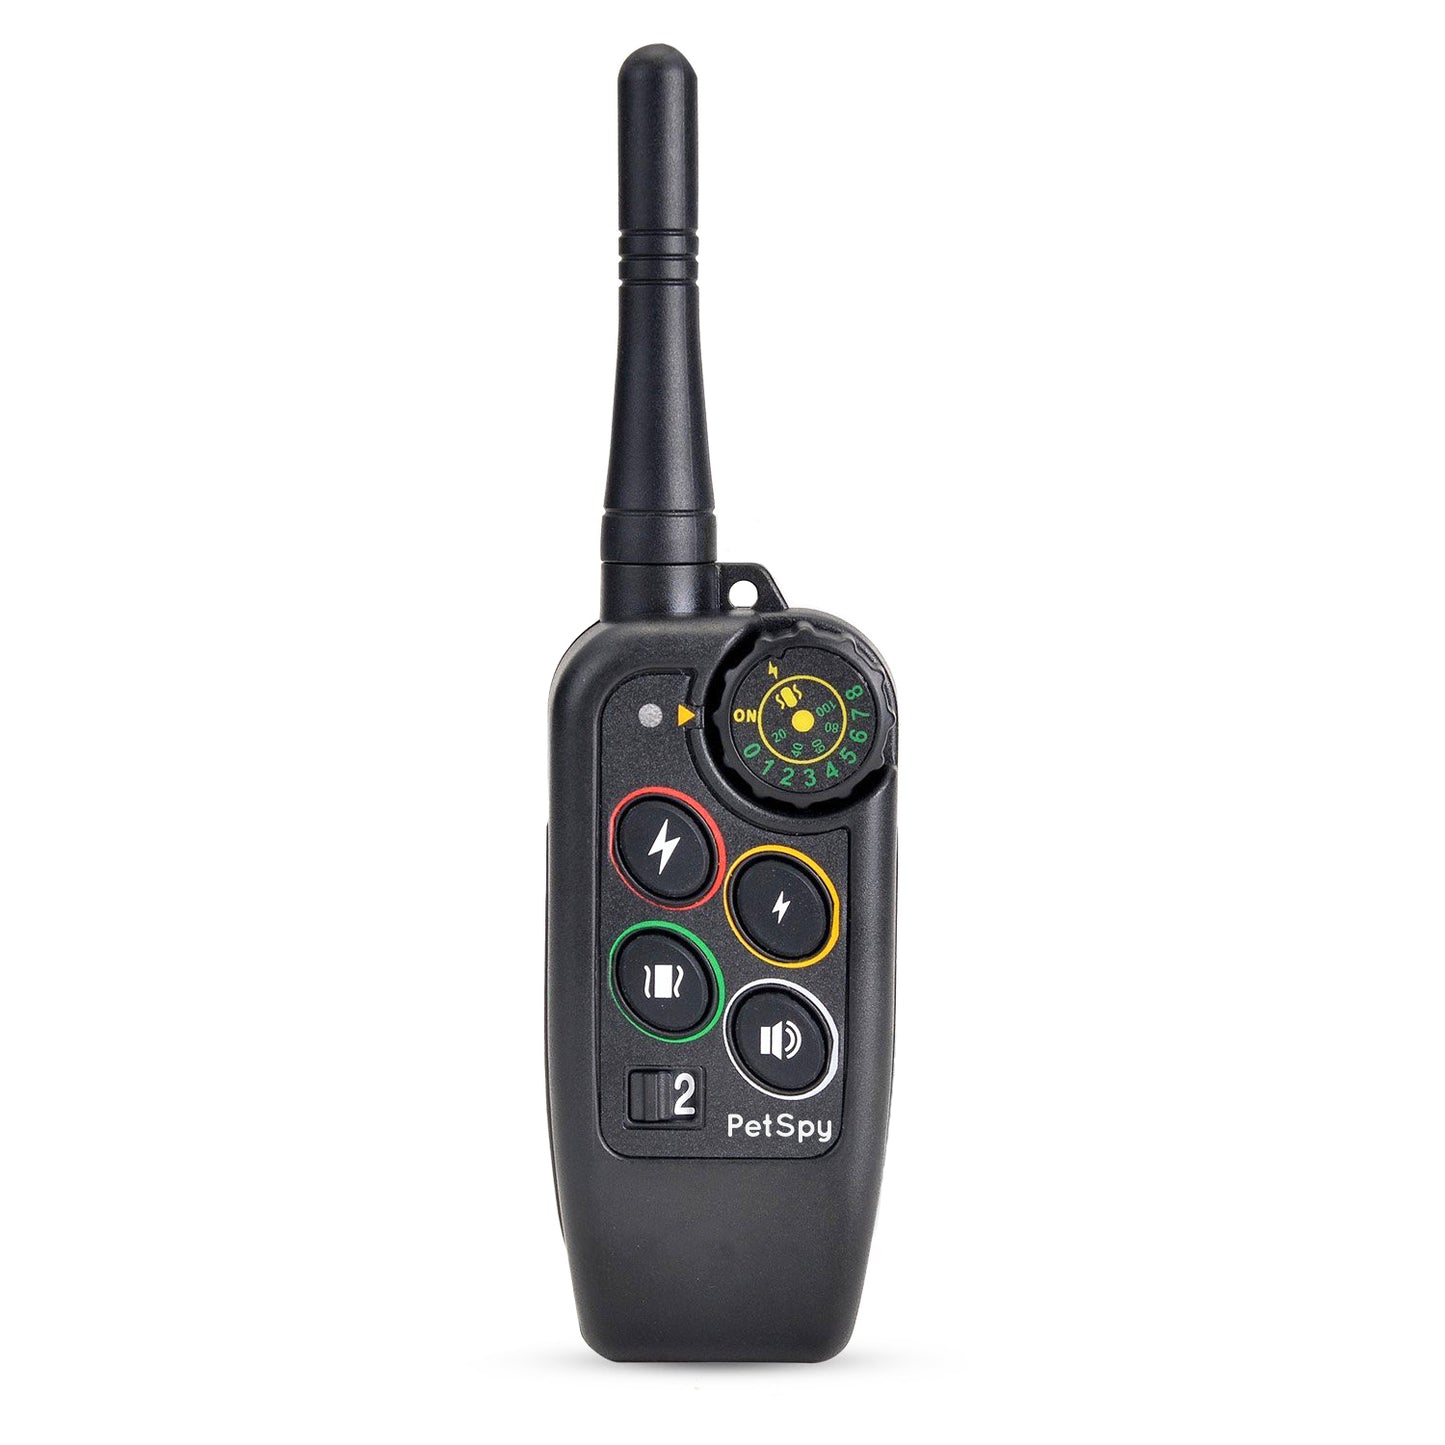 petspy replacement remote -M686 Extra Remote Transmitter - PetSpy